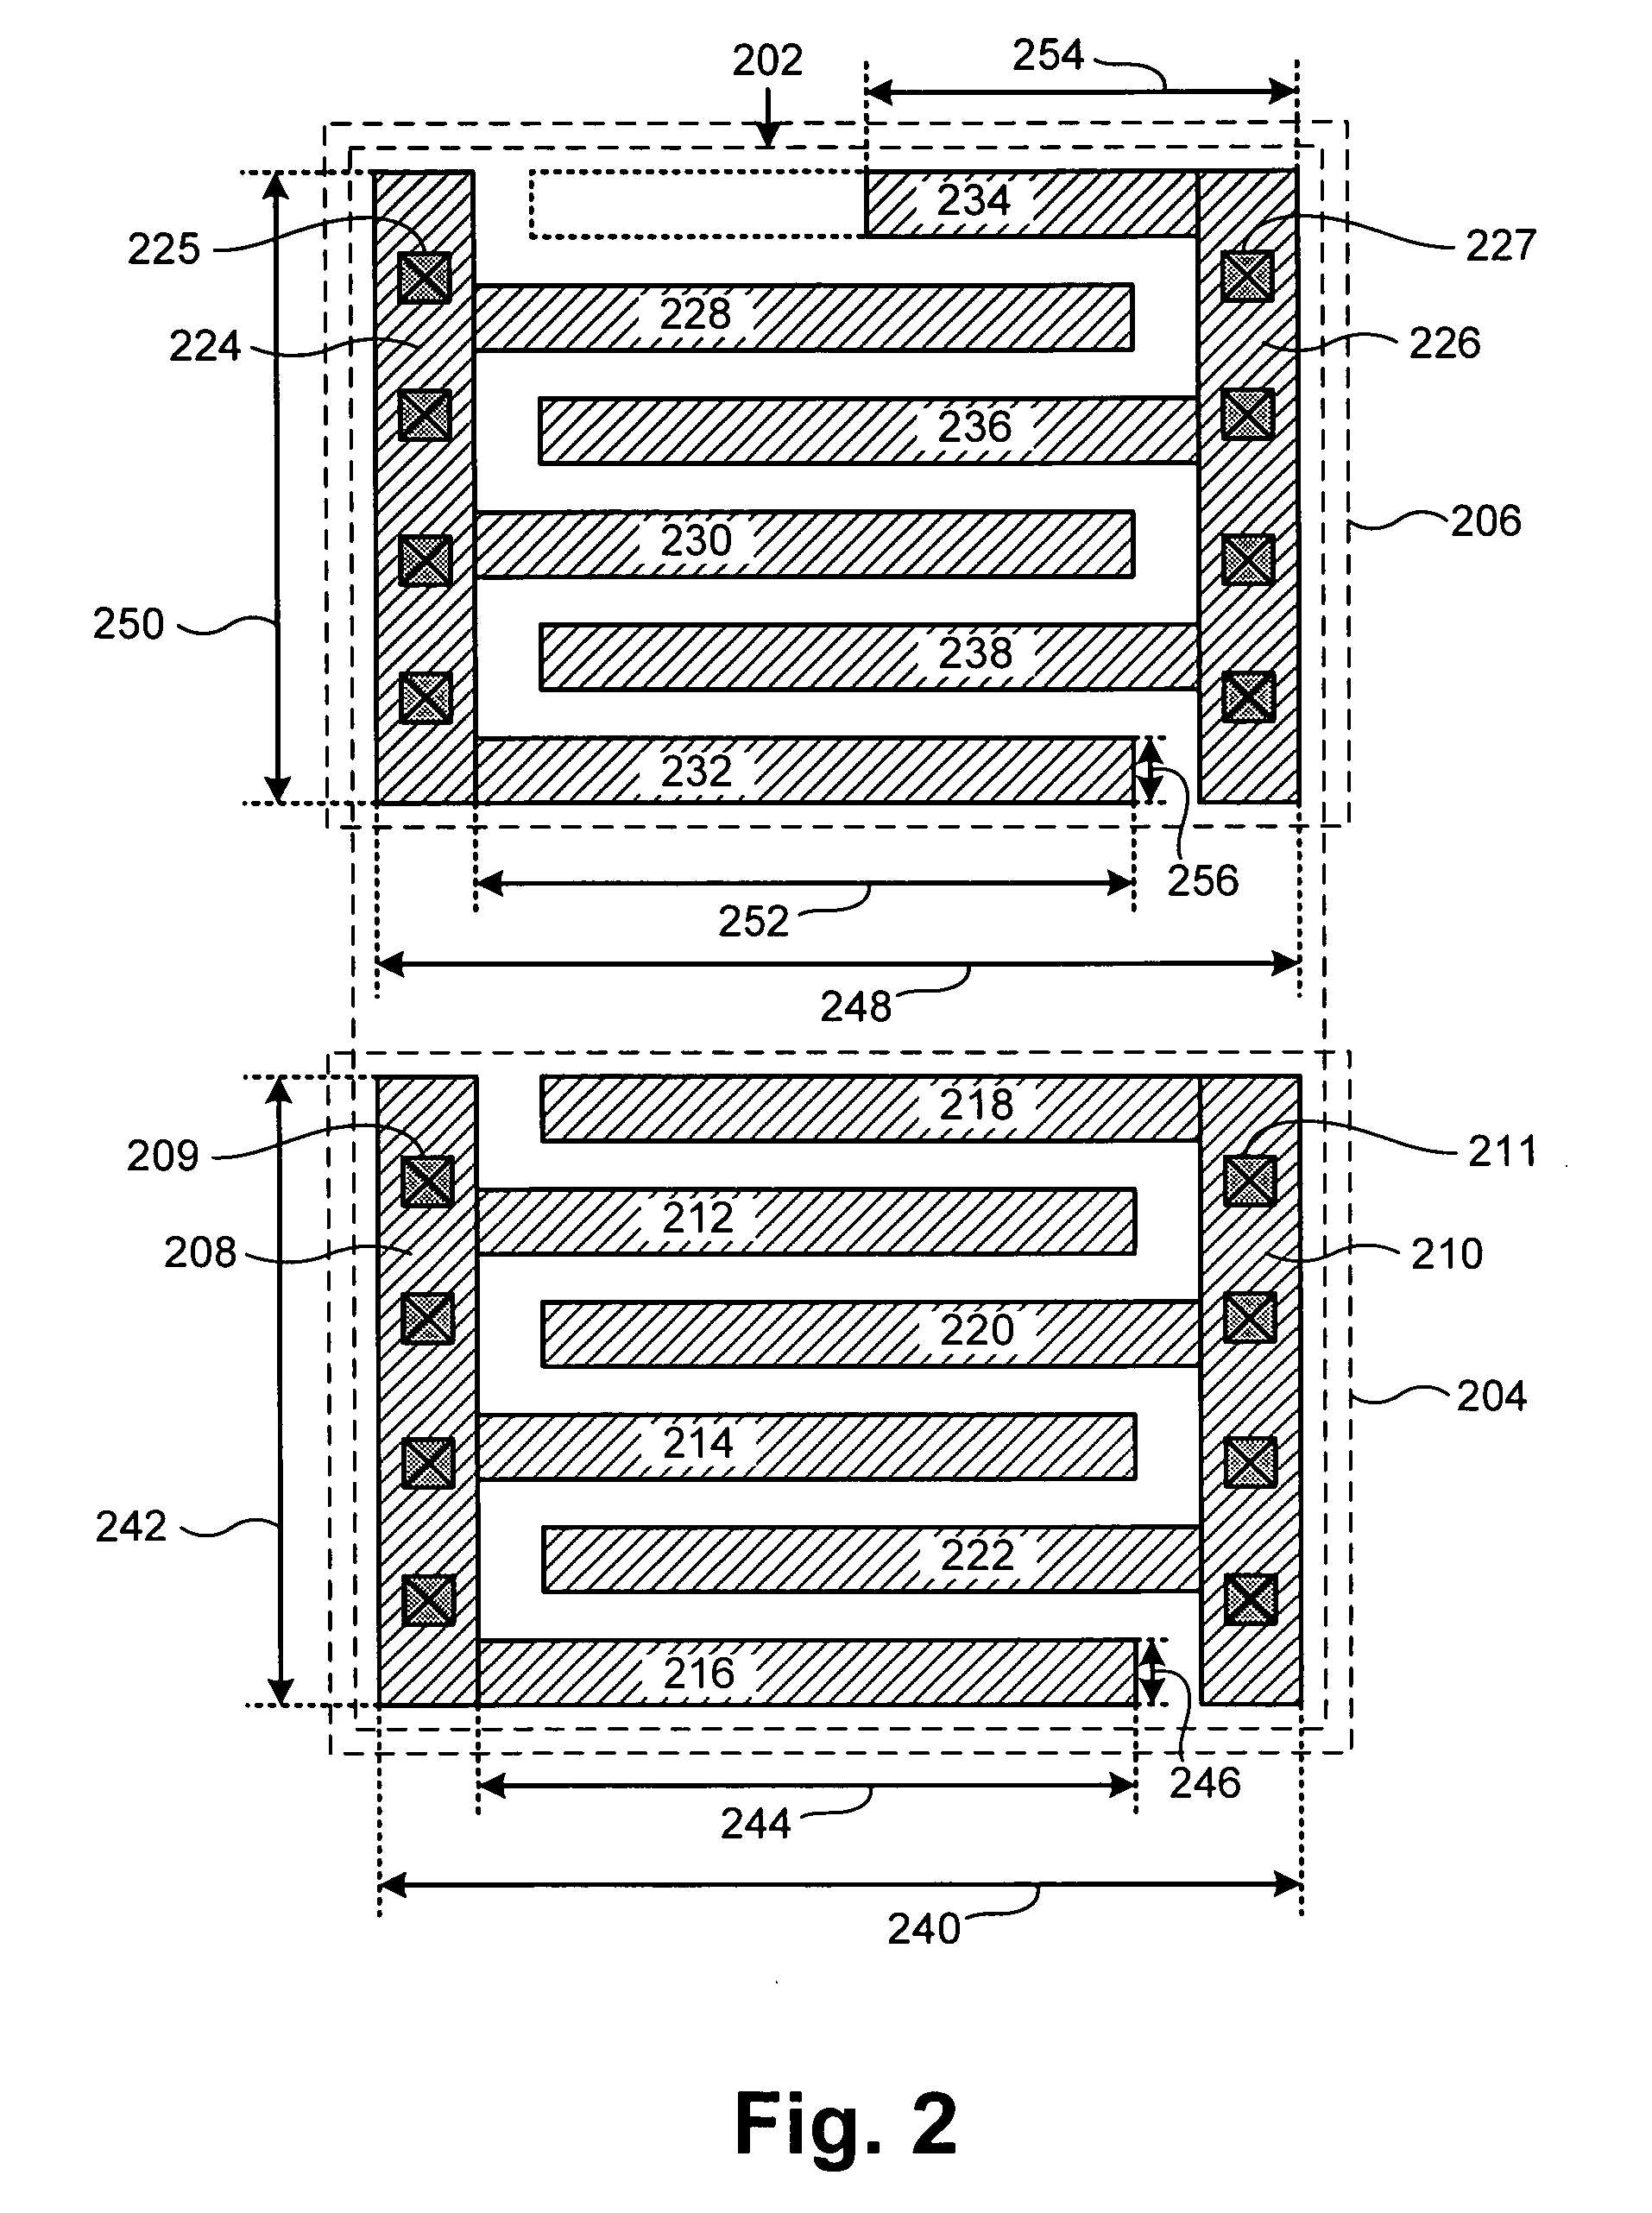 Method for adjusting capacitance of capacitors without affecting die area